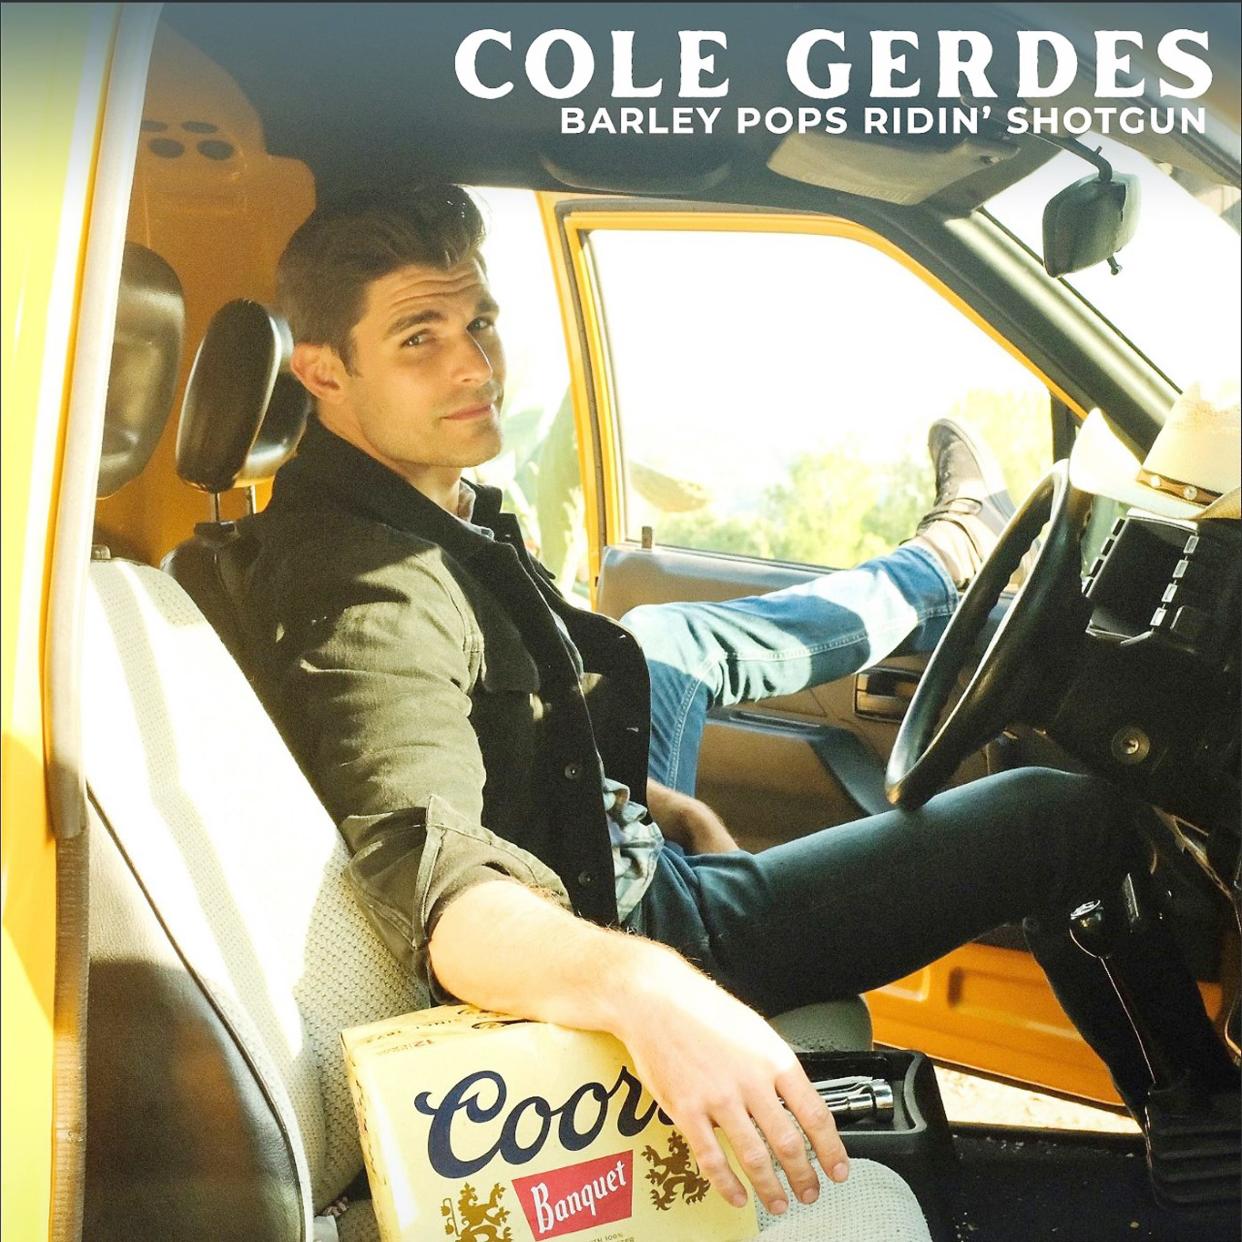 Album cover for "Barley Pops Ridin' Shotgun," which is the first album released by Pontiac native Cole Gerdes.